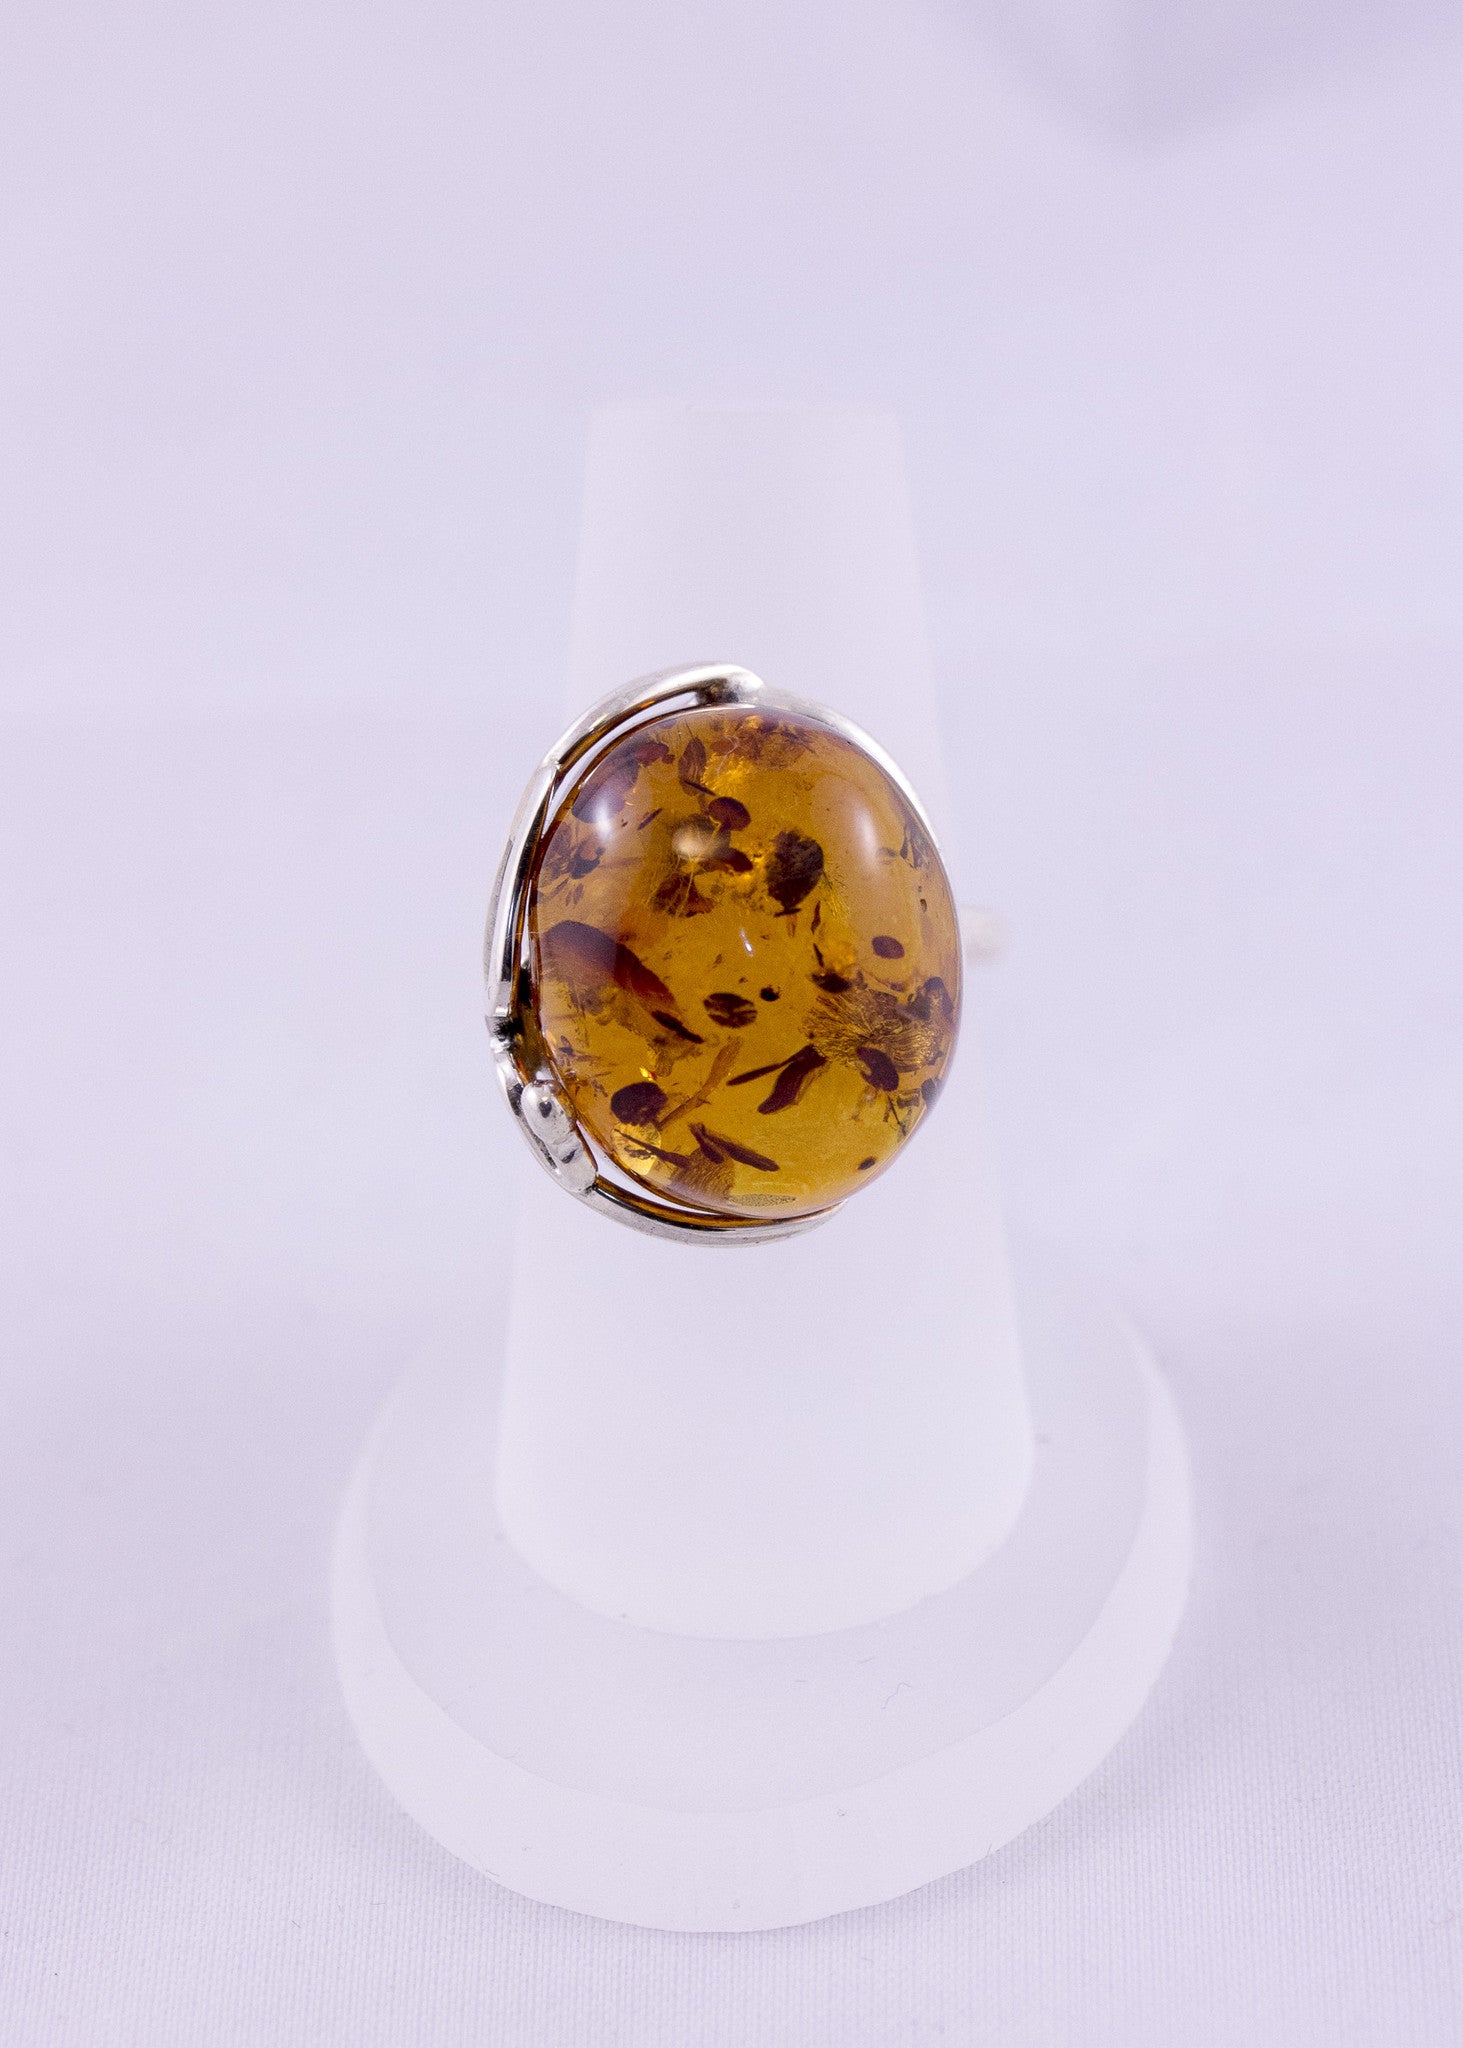 All Amber Jewellery Page 3 - Amber Tree